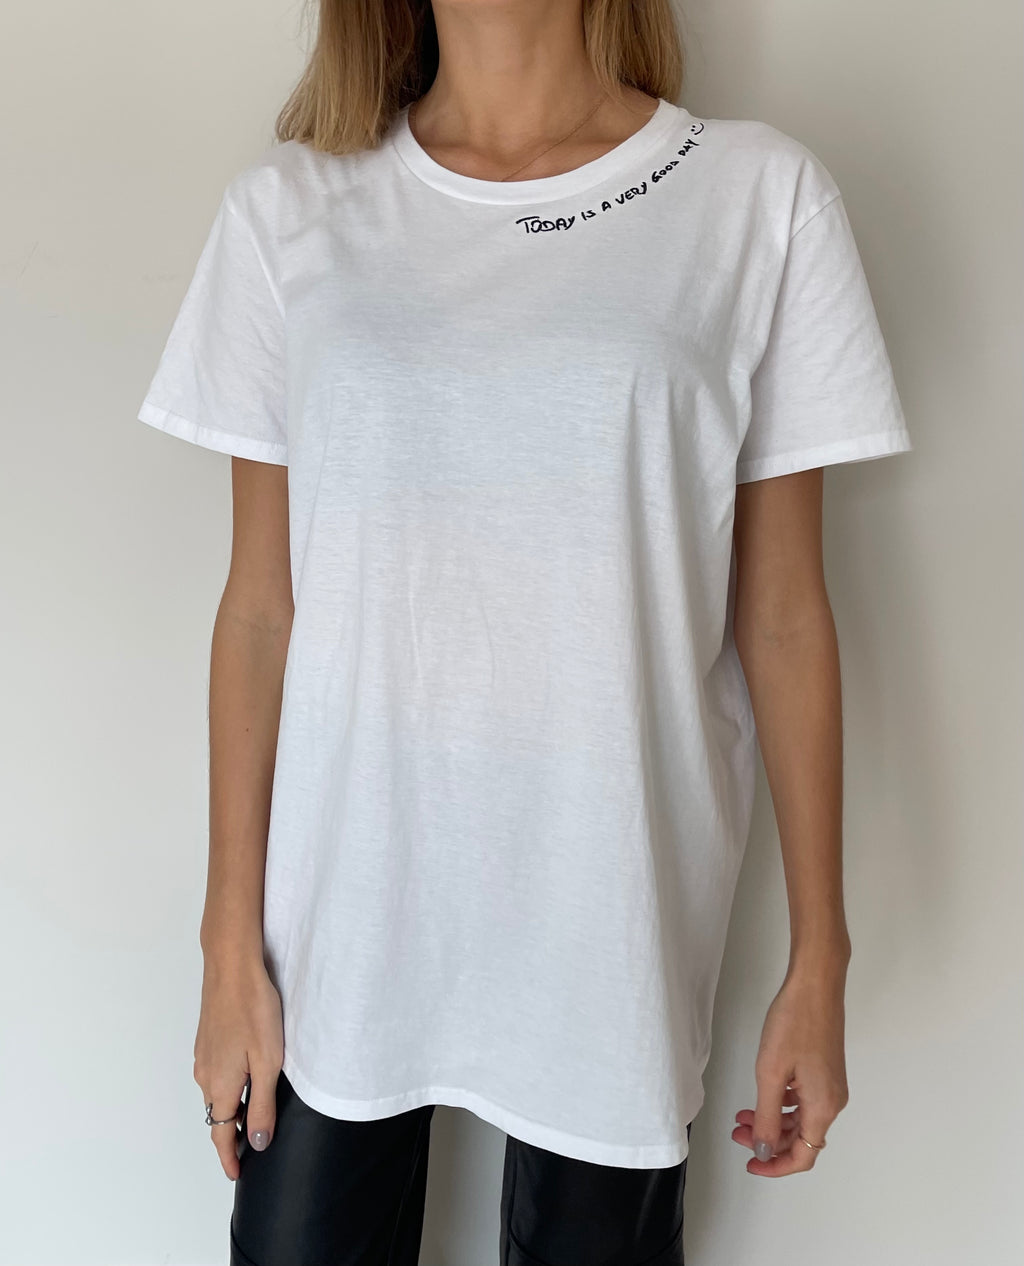 GOOD DAY// EMBROIDERED T-SHIRT